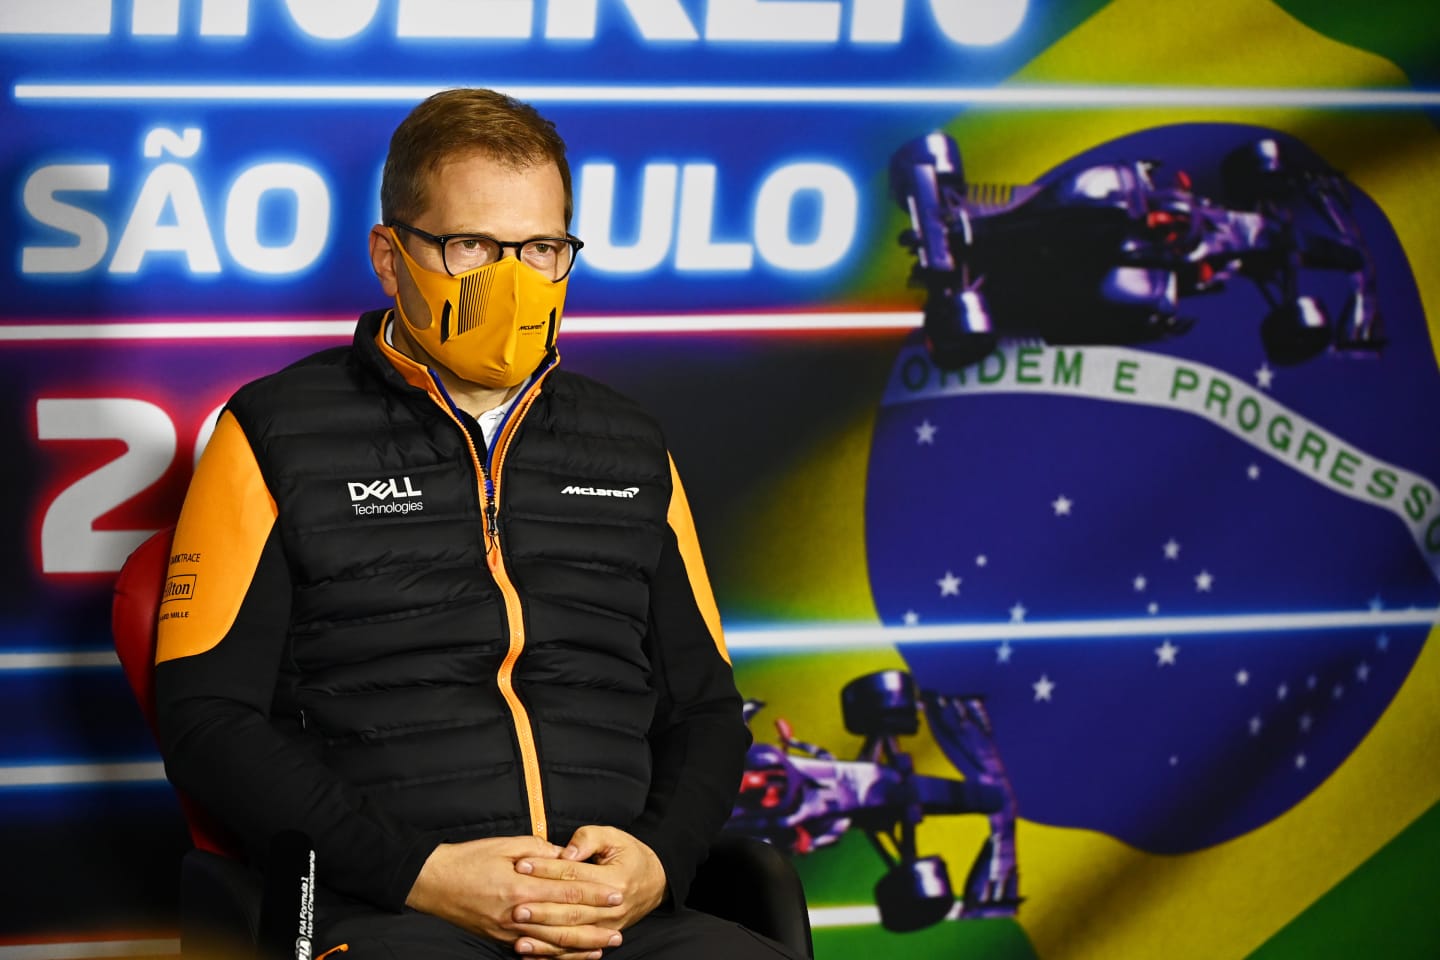 SAO PAULO, BRAZIL - NOVEMBER 12: McLaren Team Principal Andreas Seidl talks in the Team Principals Press Conference after practice ahead of the F1 Grand Prix of Brazil at Autodromo Jose Carlos Pace on November 12, 2021 in Sao Paulo, Brazil. (Photo by Clive Mason/Getty Images)